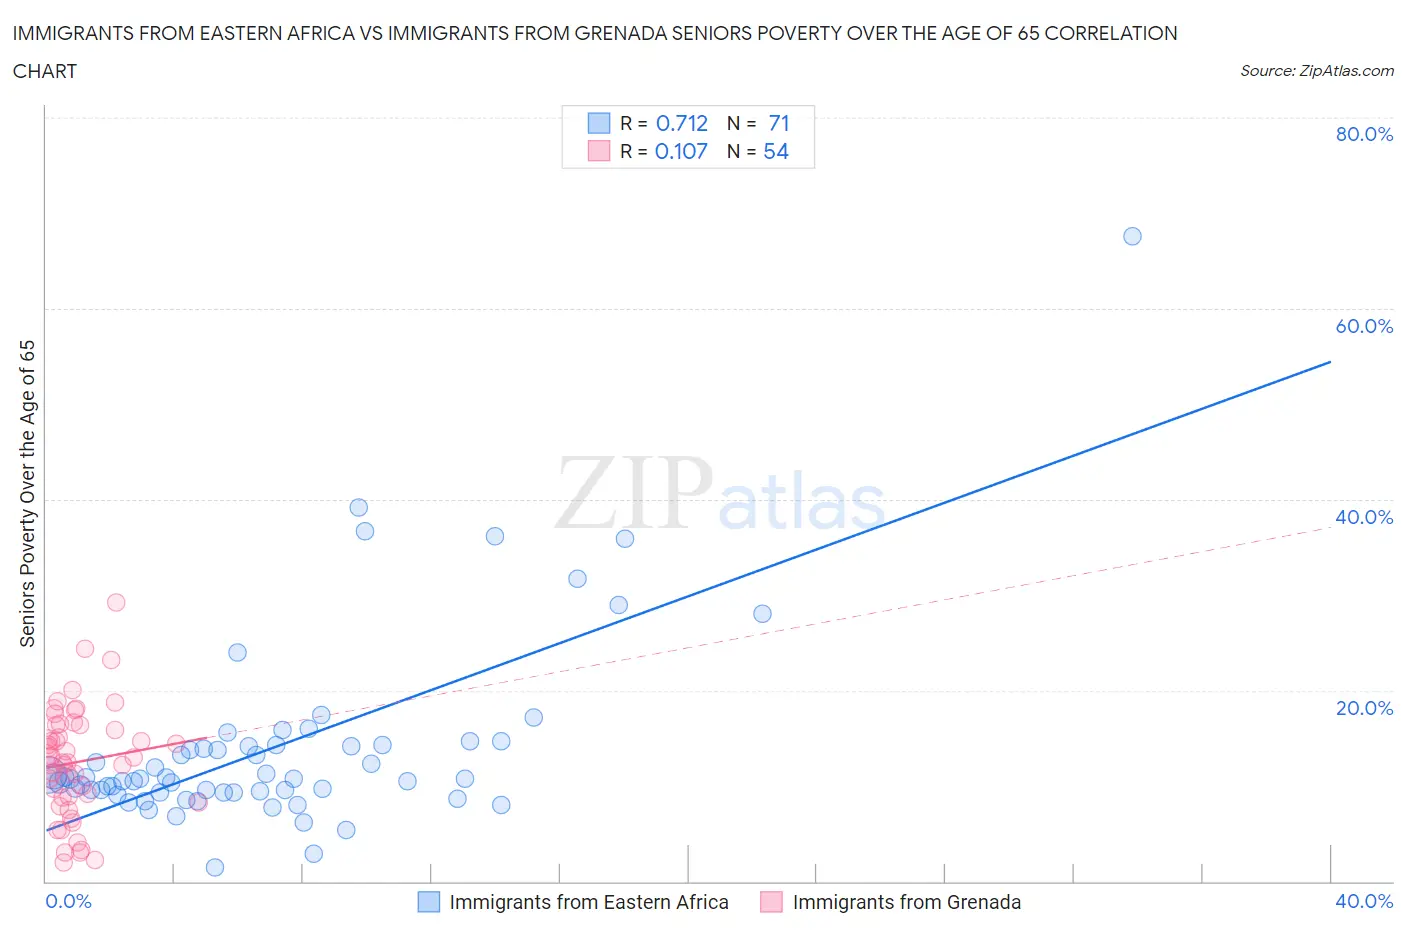 Immigrants from Eastern Africa vs Immigrants from Grenada Seniors Poverty Over the Age of 65